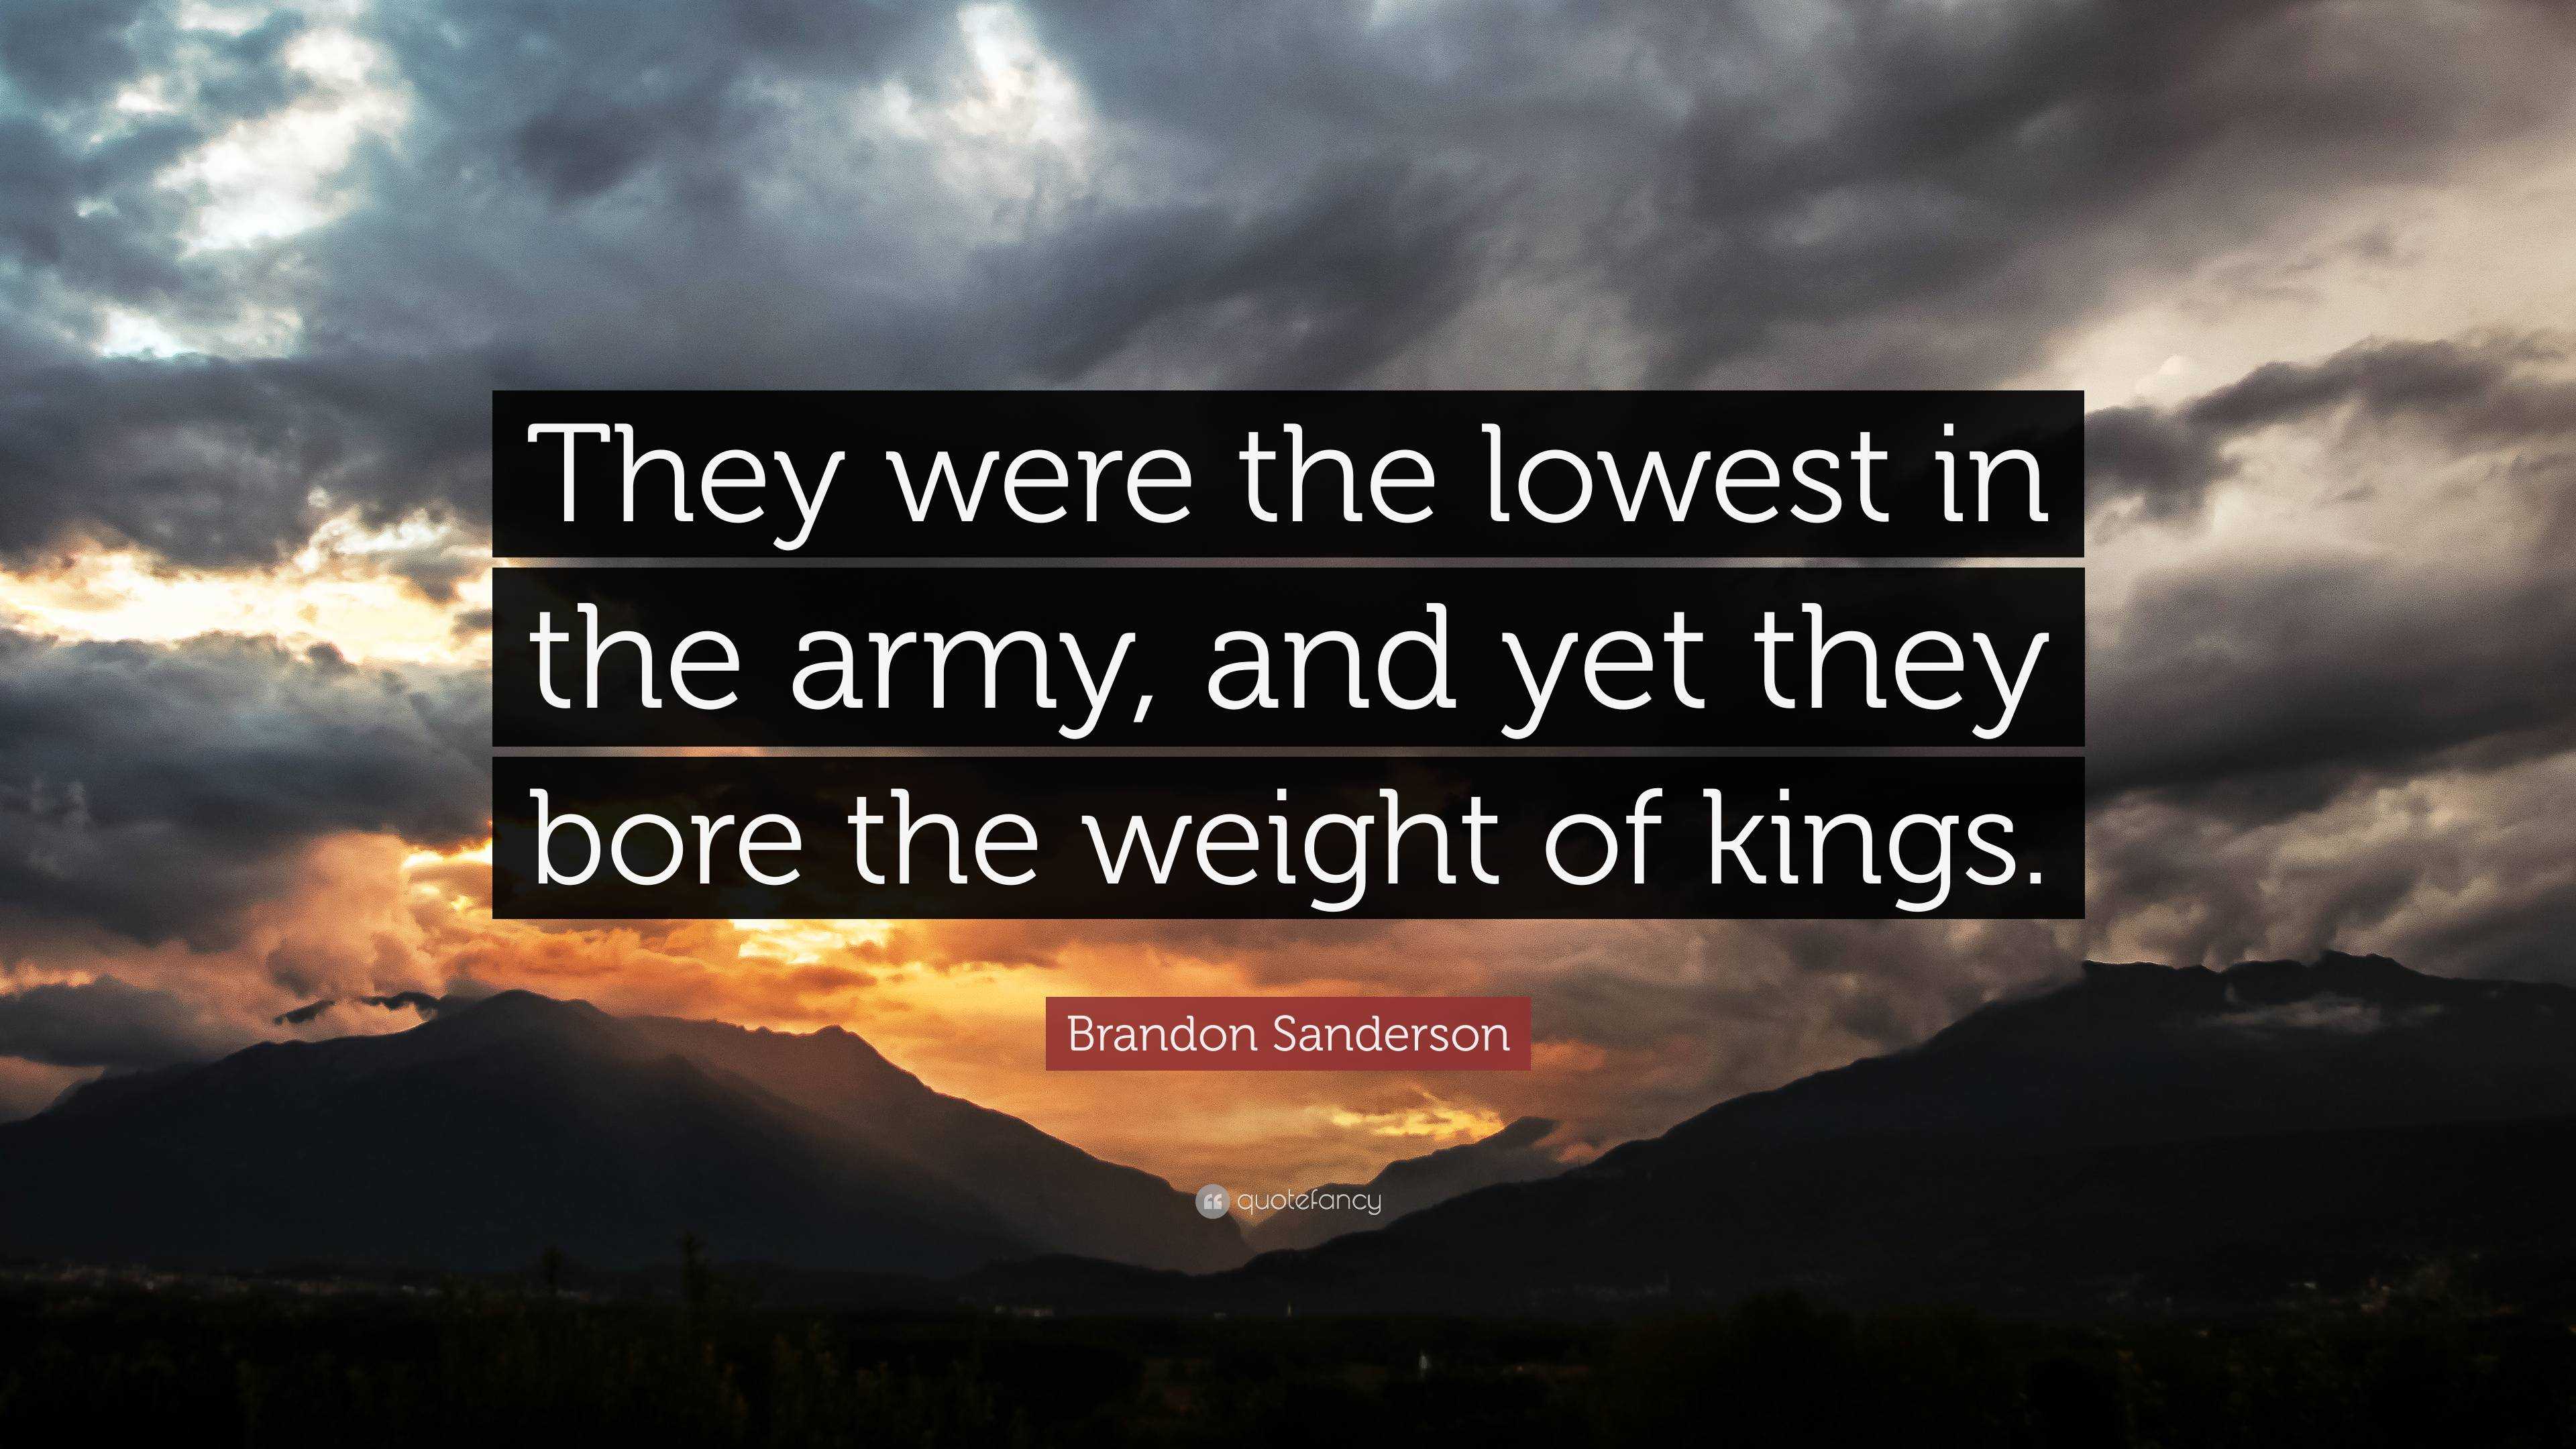 https://quotefancy.com/media/wallpaper/3840x2160/6459352-Brandon-Sanderson-Quote-They-were-the-lowest-in-the-army-and-yet.jpg